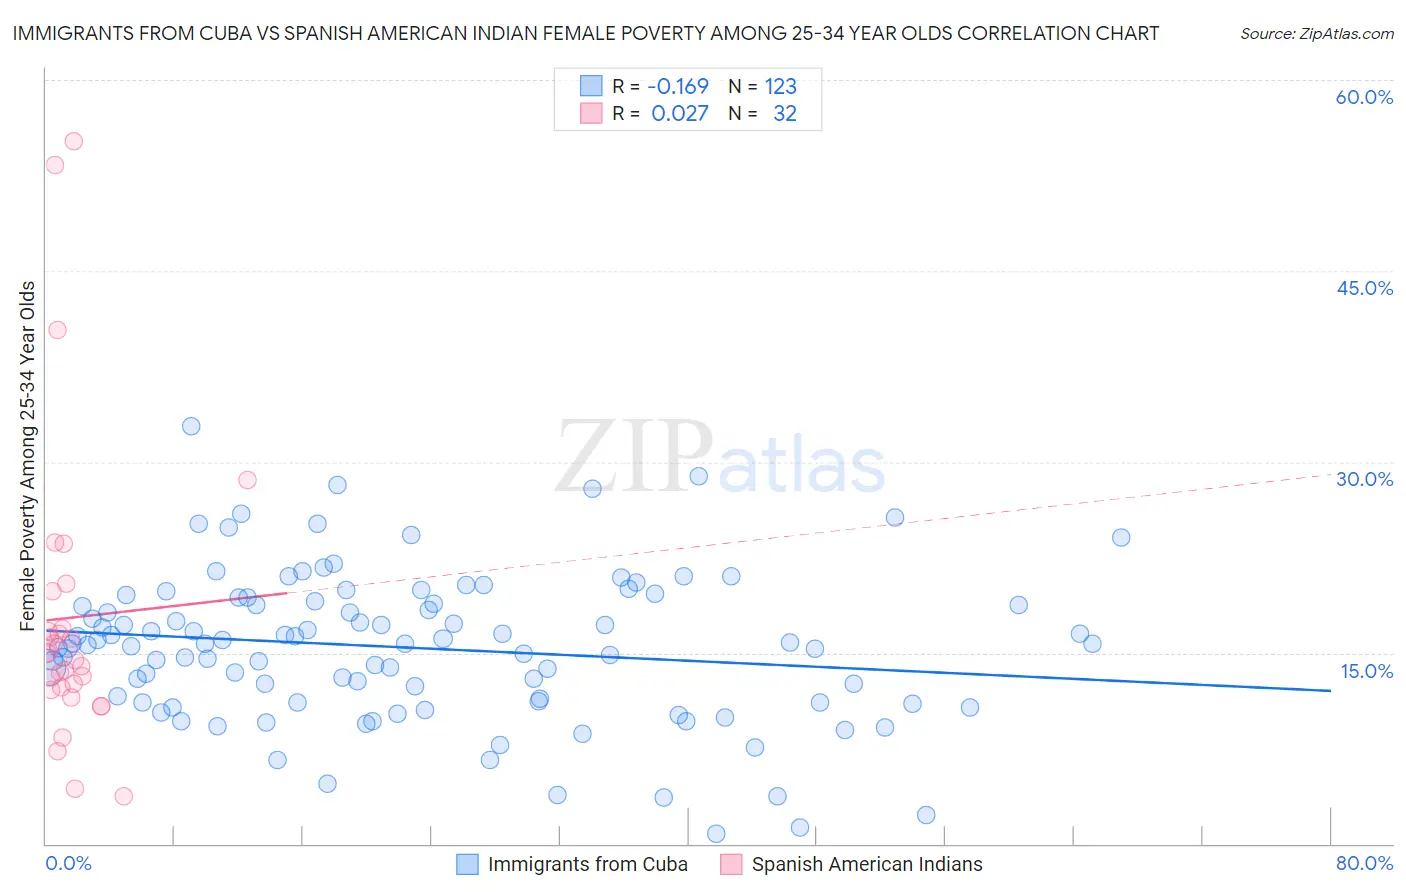 Immigrants from Cuba vs Spanish American Indian Female Poverty Among 25-34 Year Olds